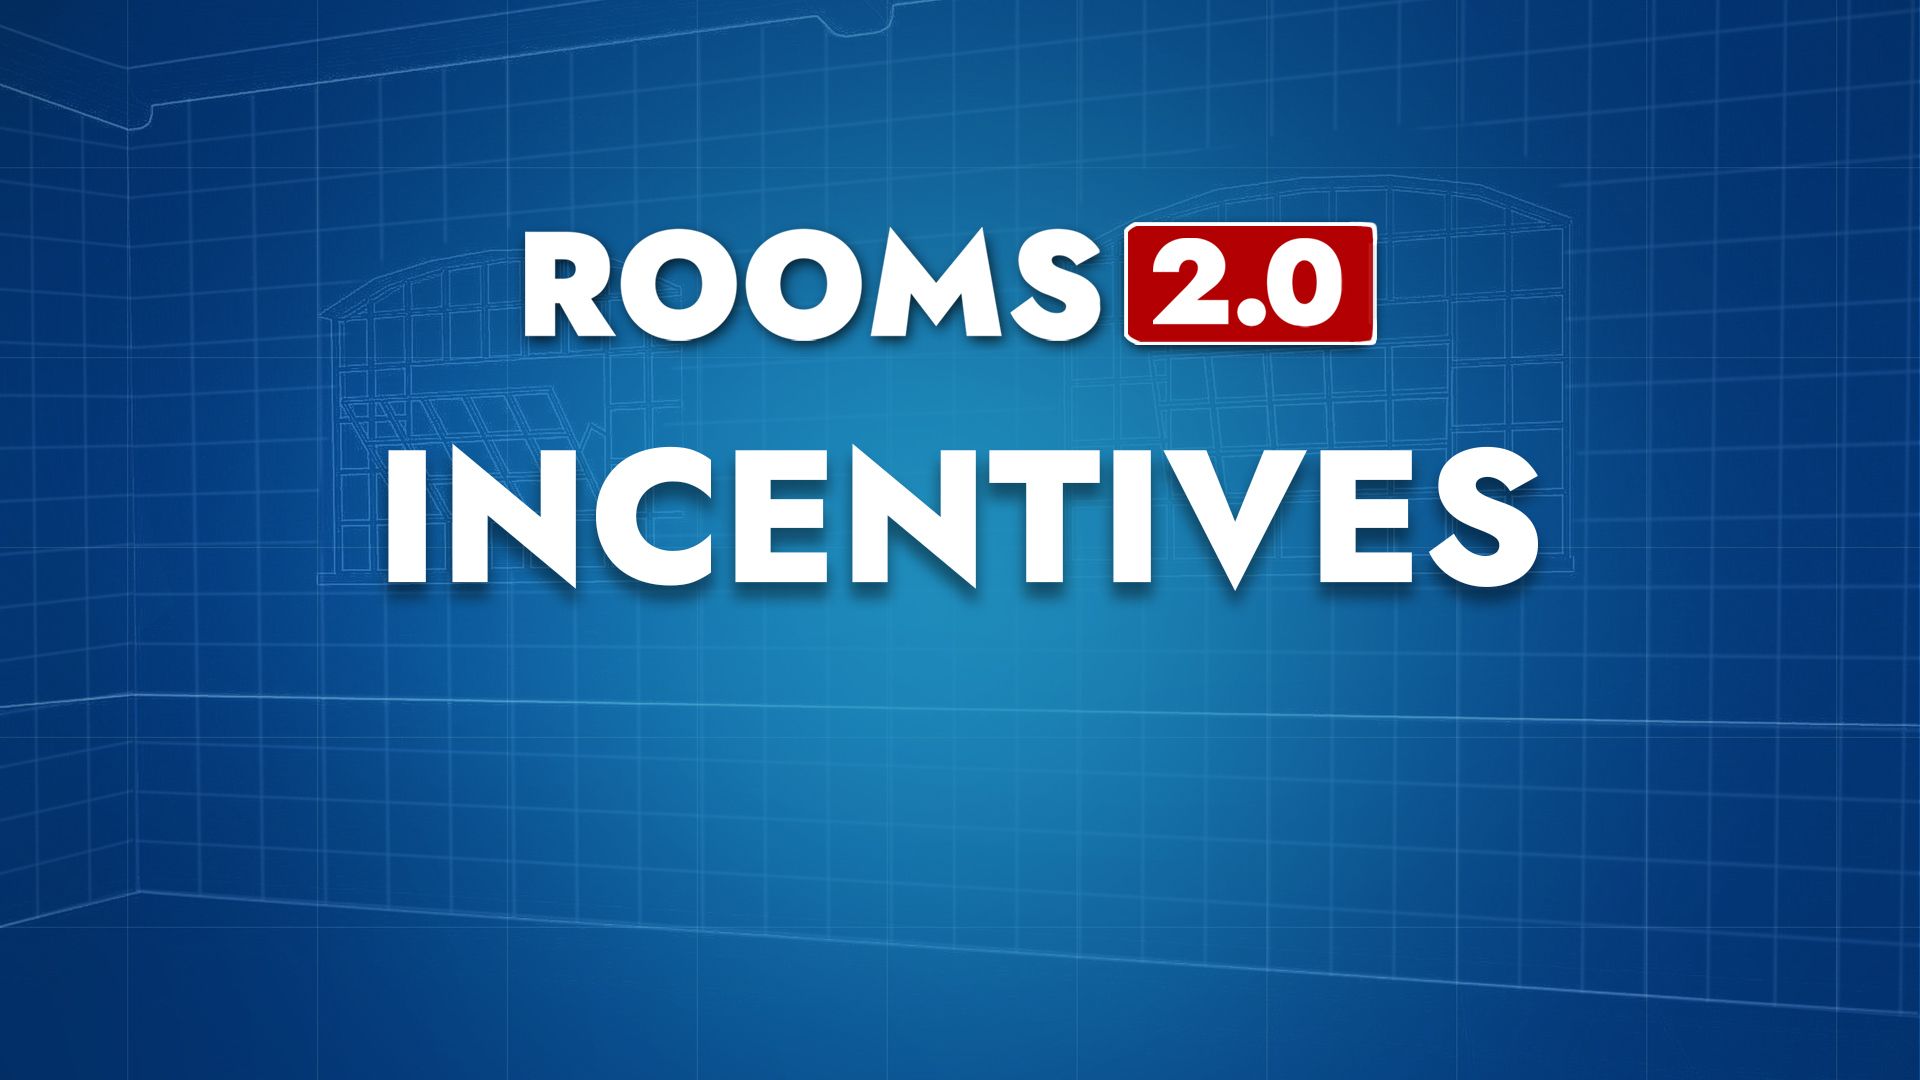 Rooms 2.0 Incentives